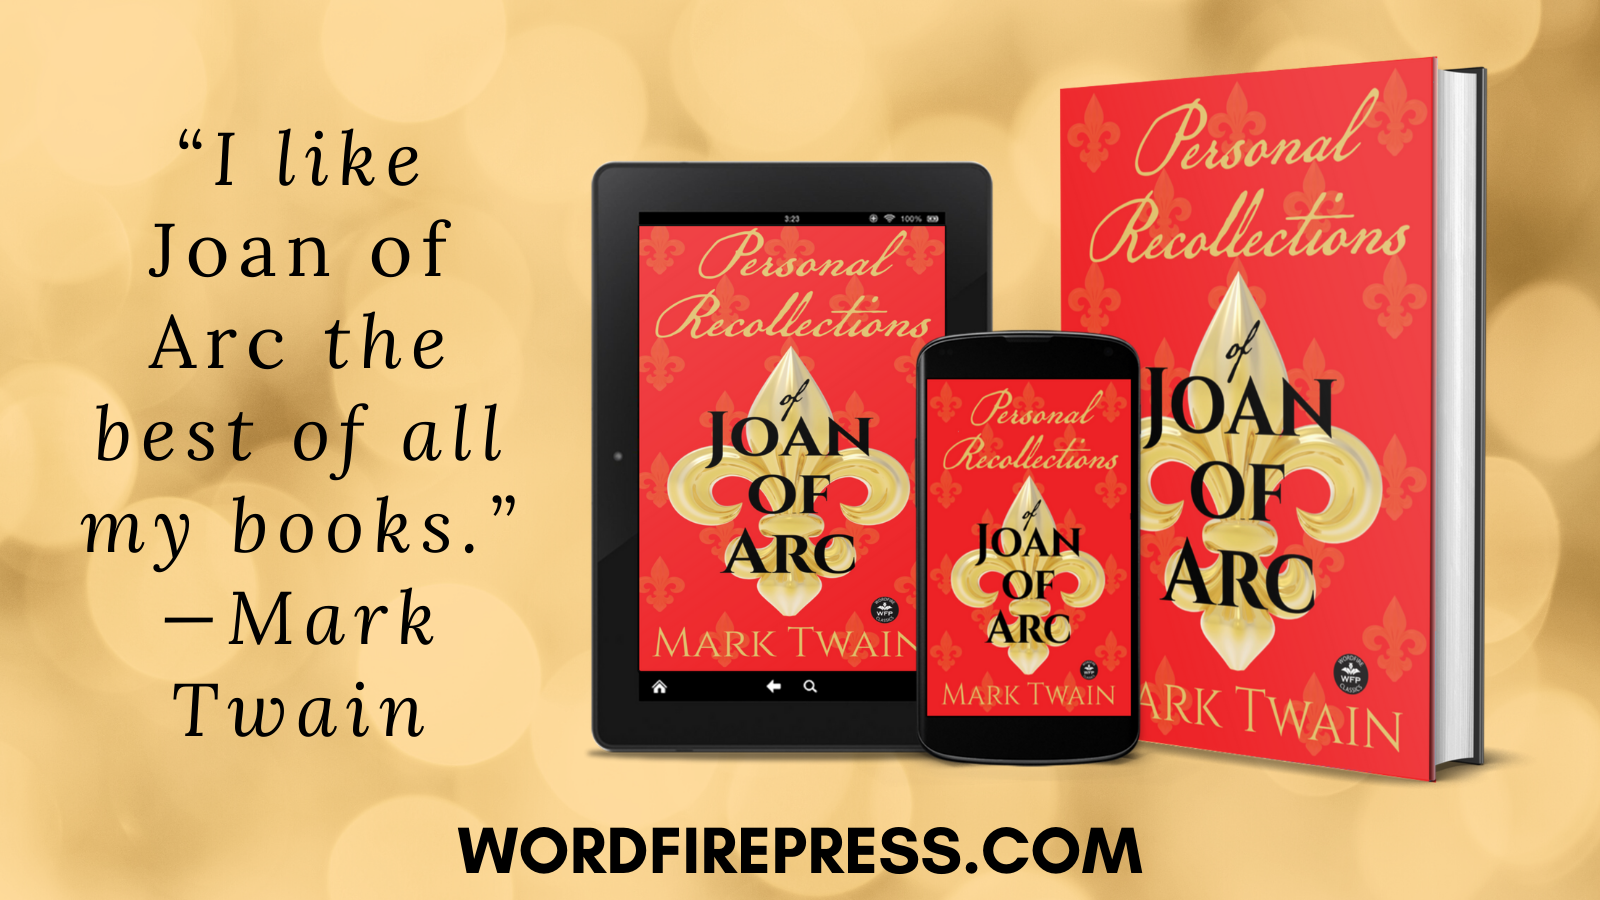 It’s Release Day for Joan of Arc!